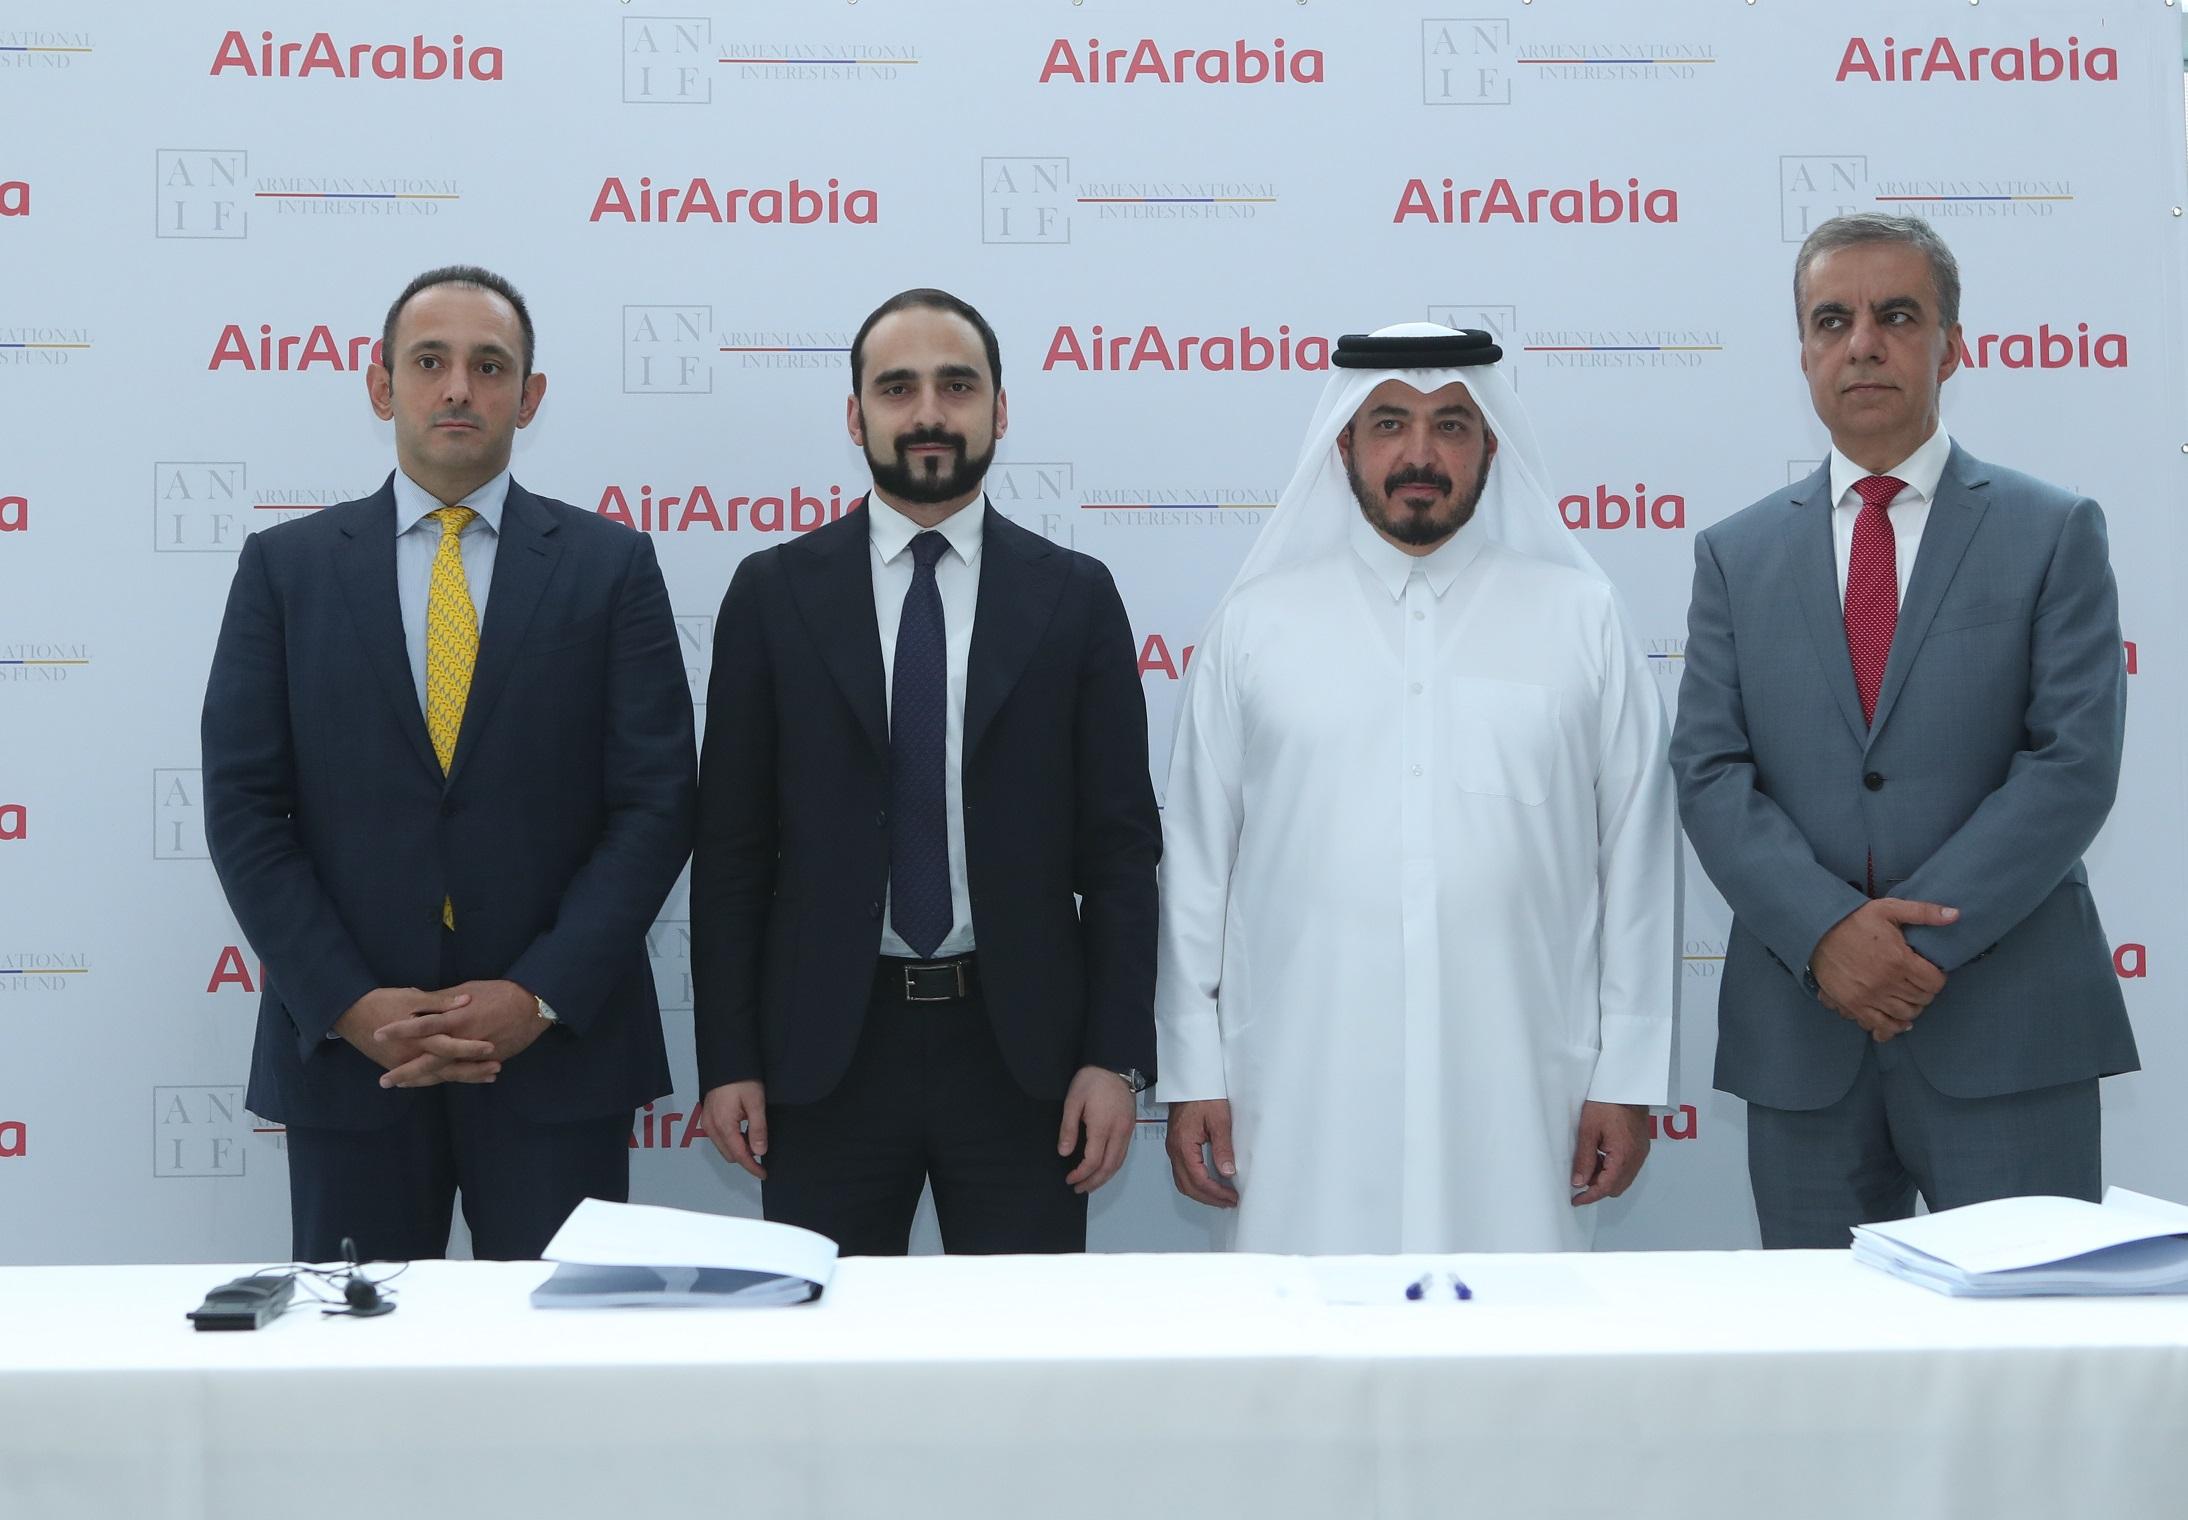  ANIF and Air Arabia joint venture to launch new carrier